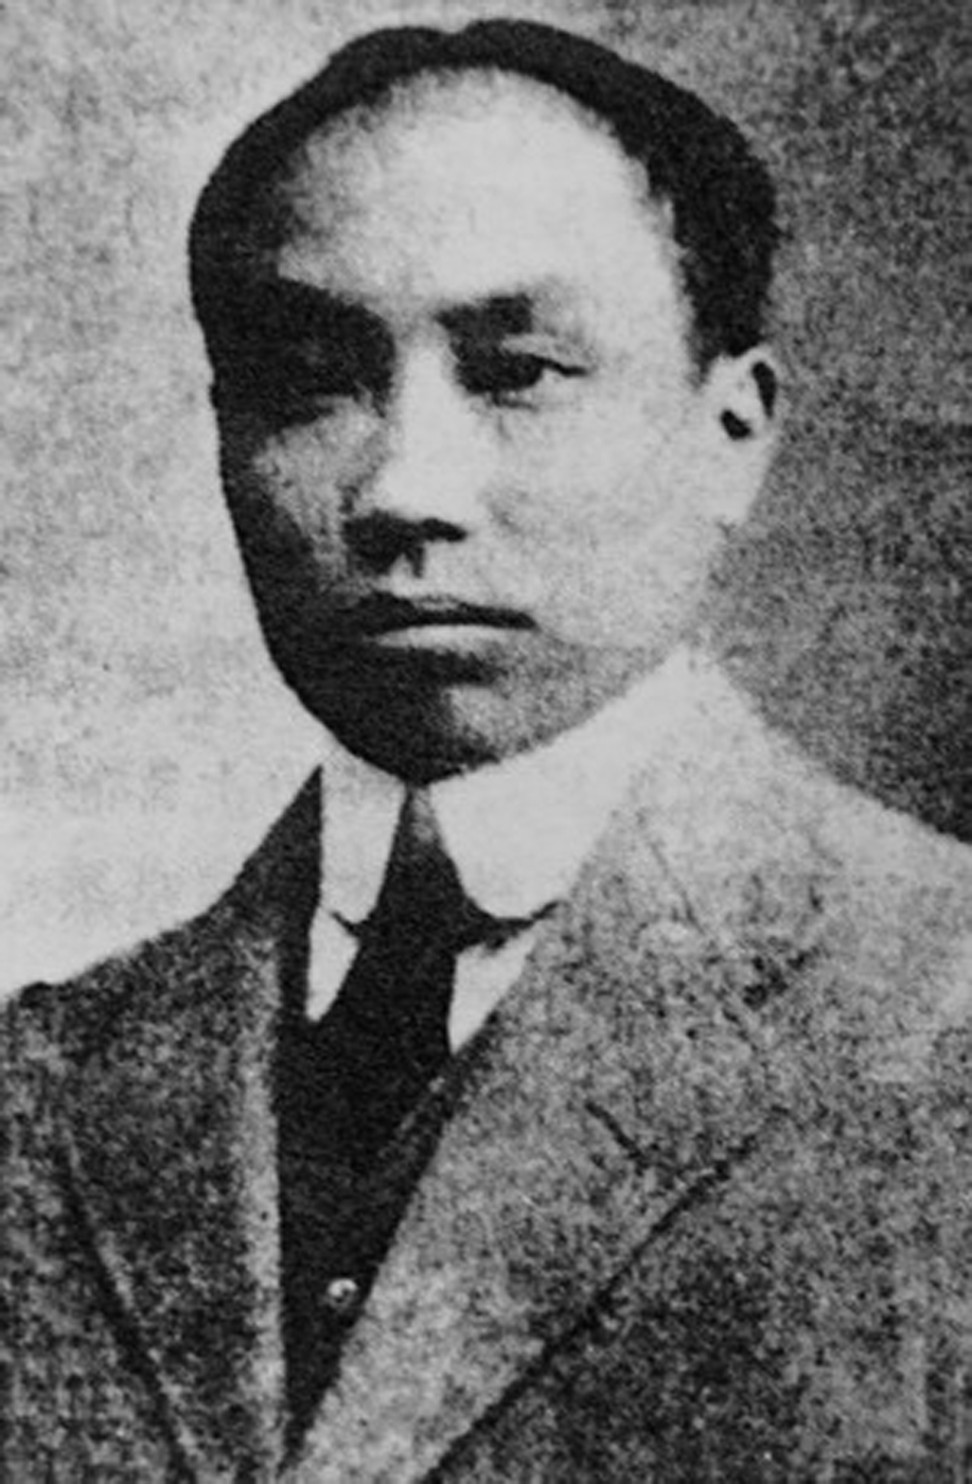 Chinese firebrand Chen Duxiu founded New Youth monthly magazine in 1915 and co-founded the Chinese Communist Party in 1921. Hu Shih, Lu Xun and Mao Zedong were among the young contributors to the magazine who would become intellectual and political leaders. Chen was expelled from the party in 1929. Photo: Handout